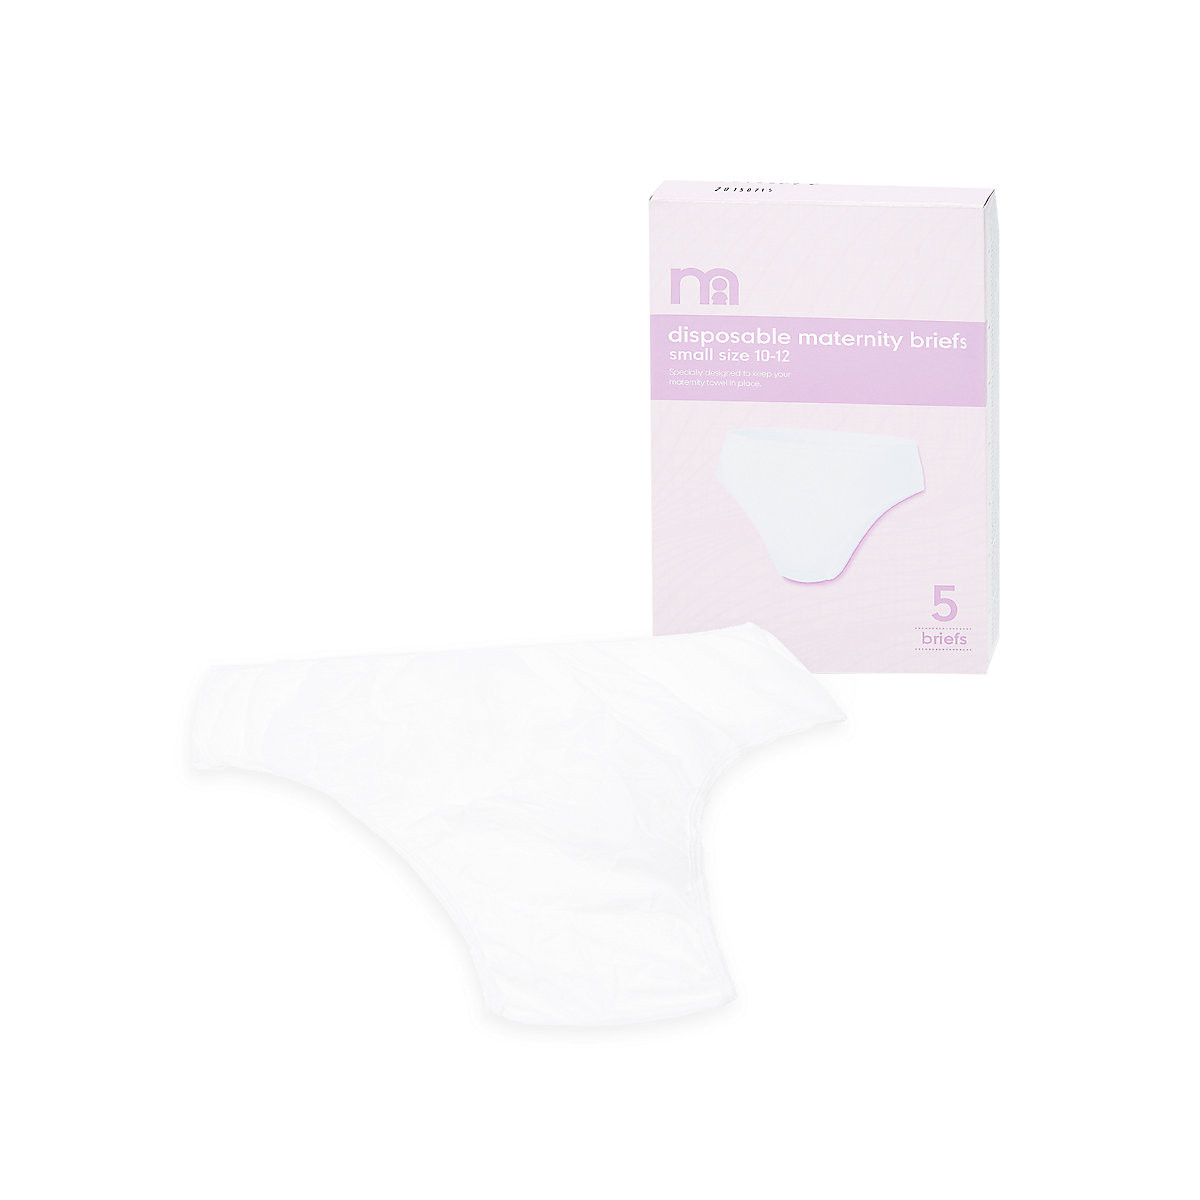 TESCO 5 Maternity Disposable Briefs Large 18-20